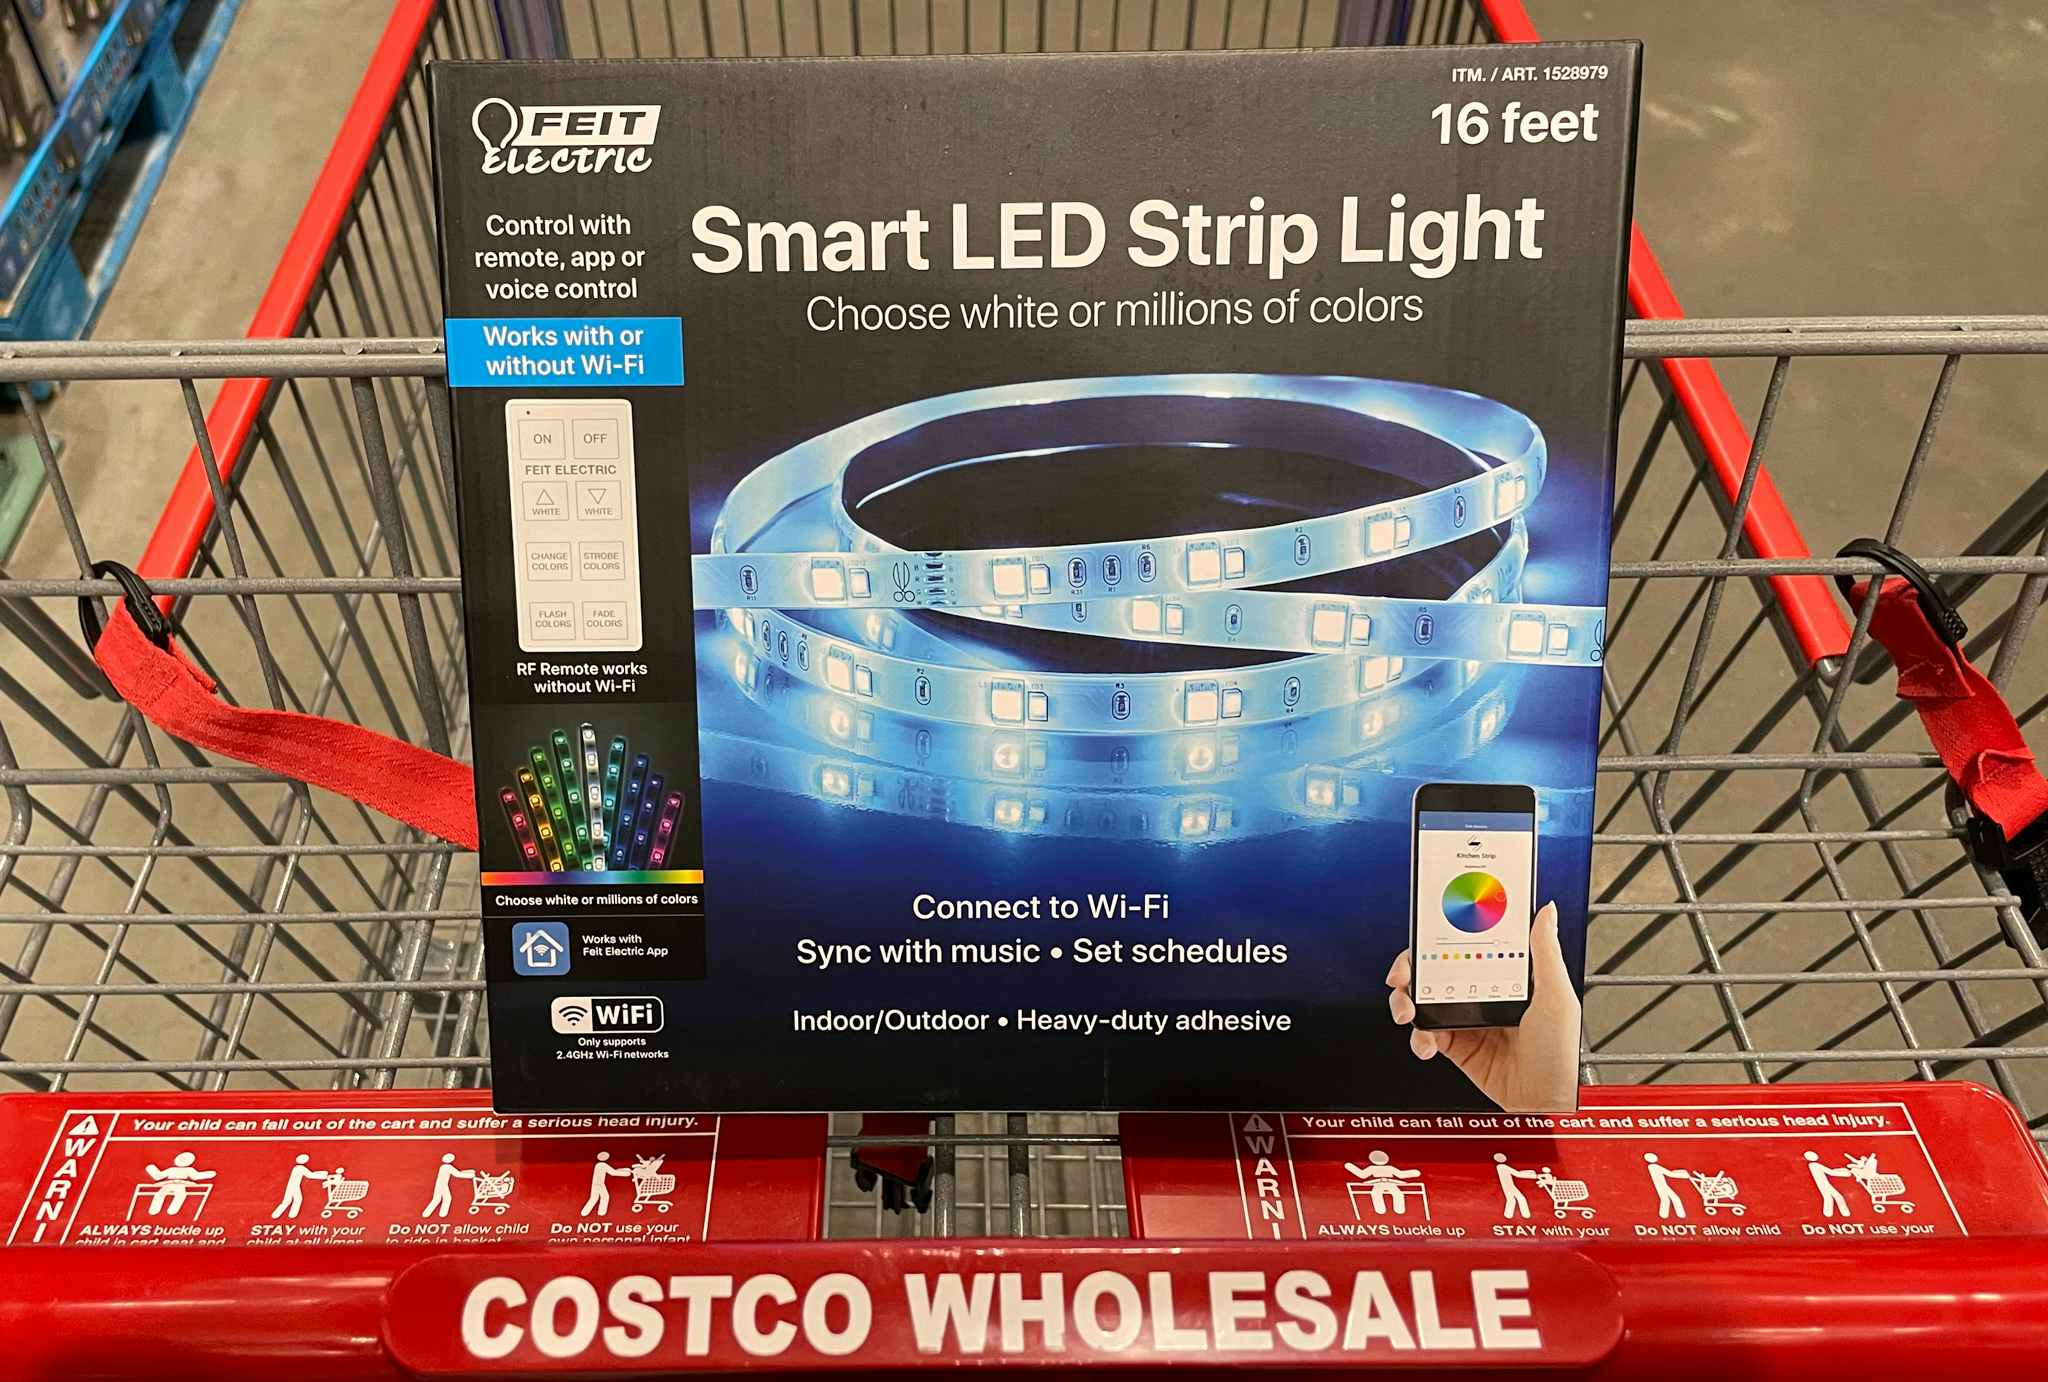 led strip light in a box in a cart at costco